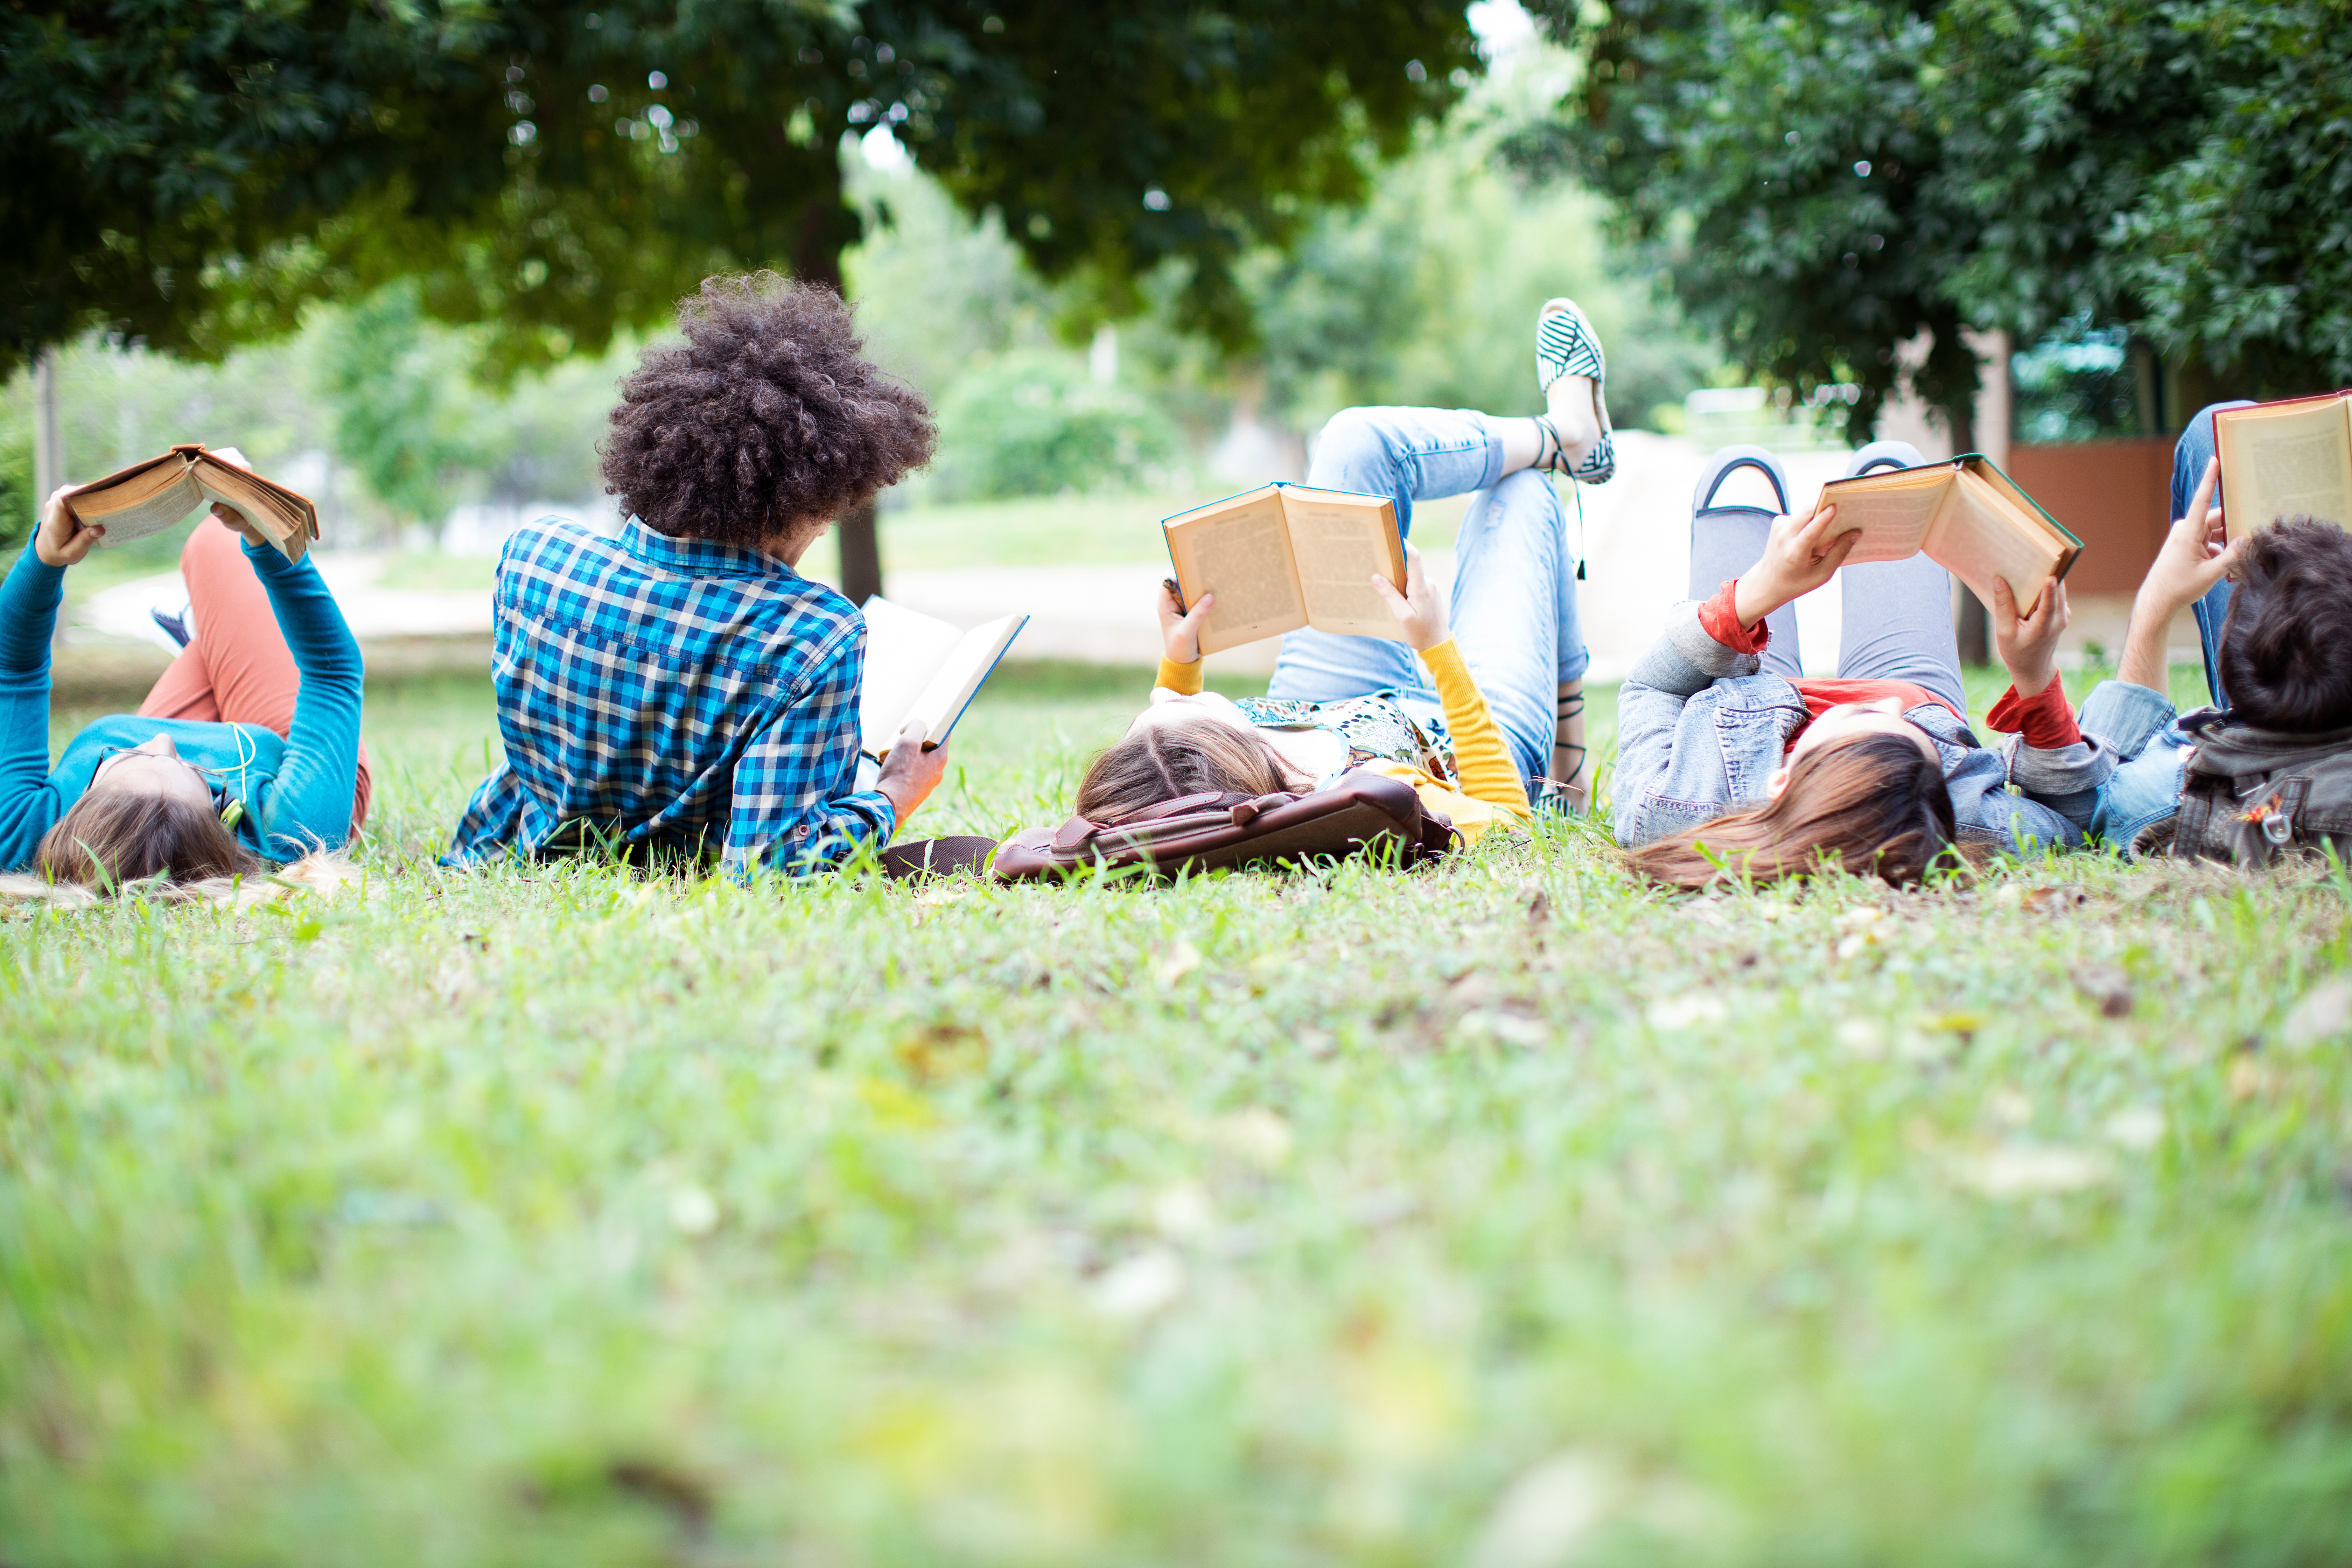 A group of youth lay on the grass reading books